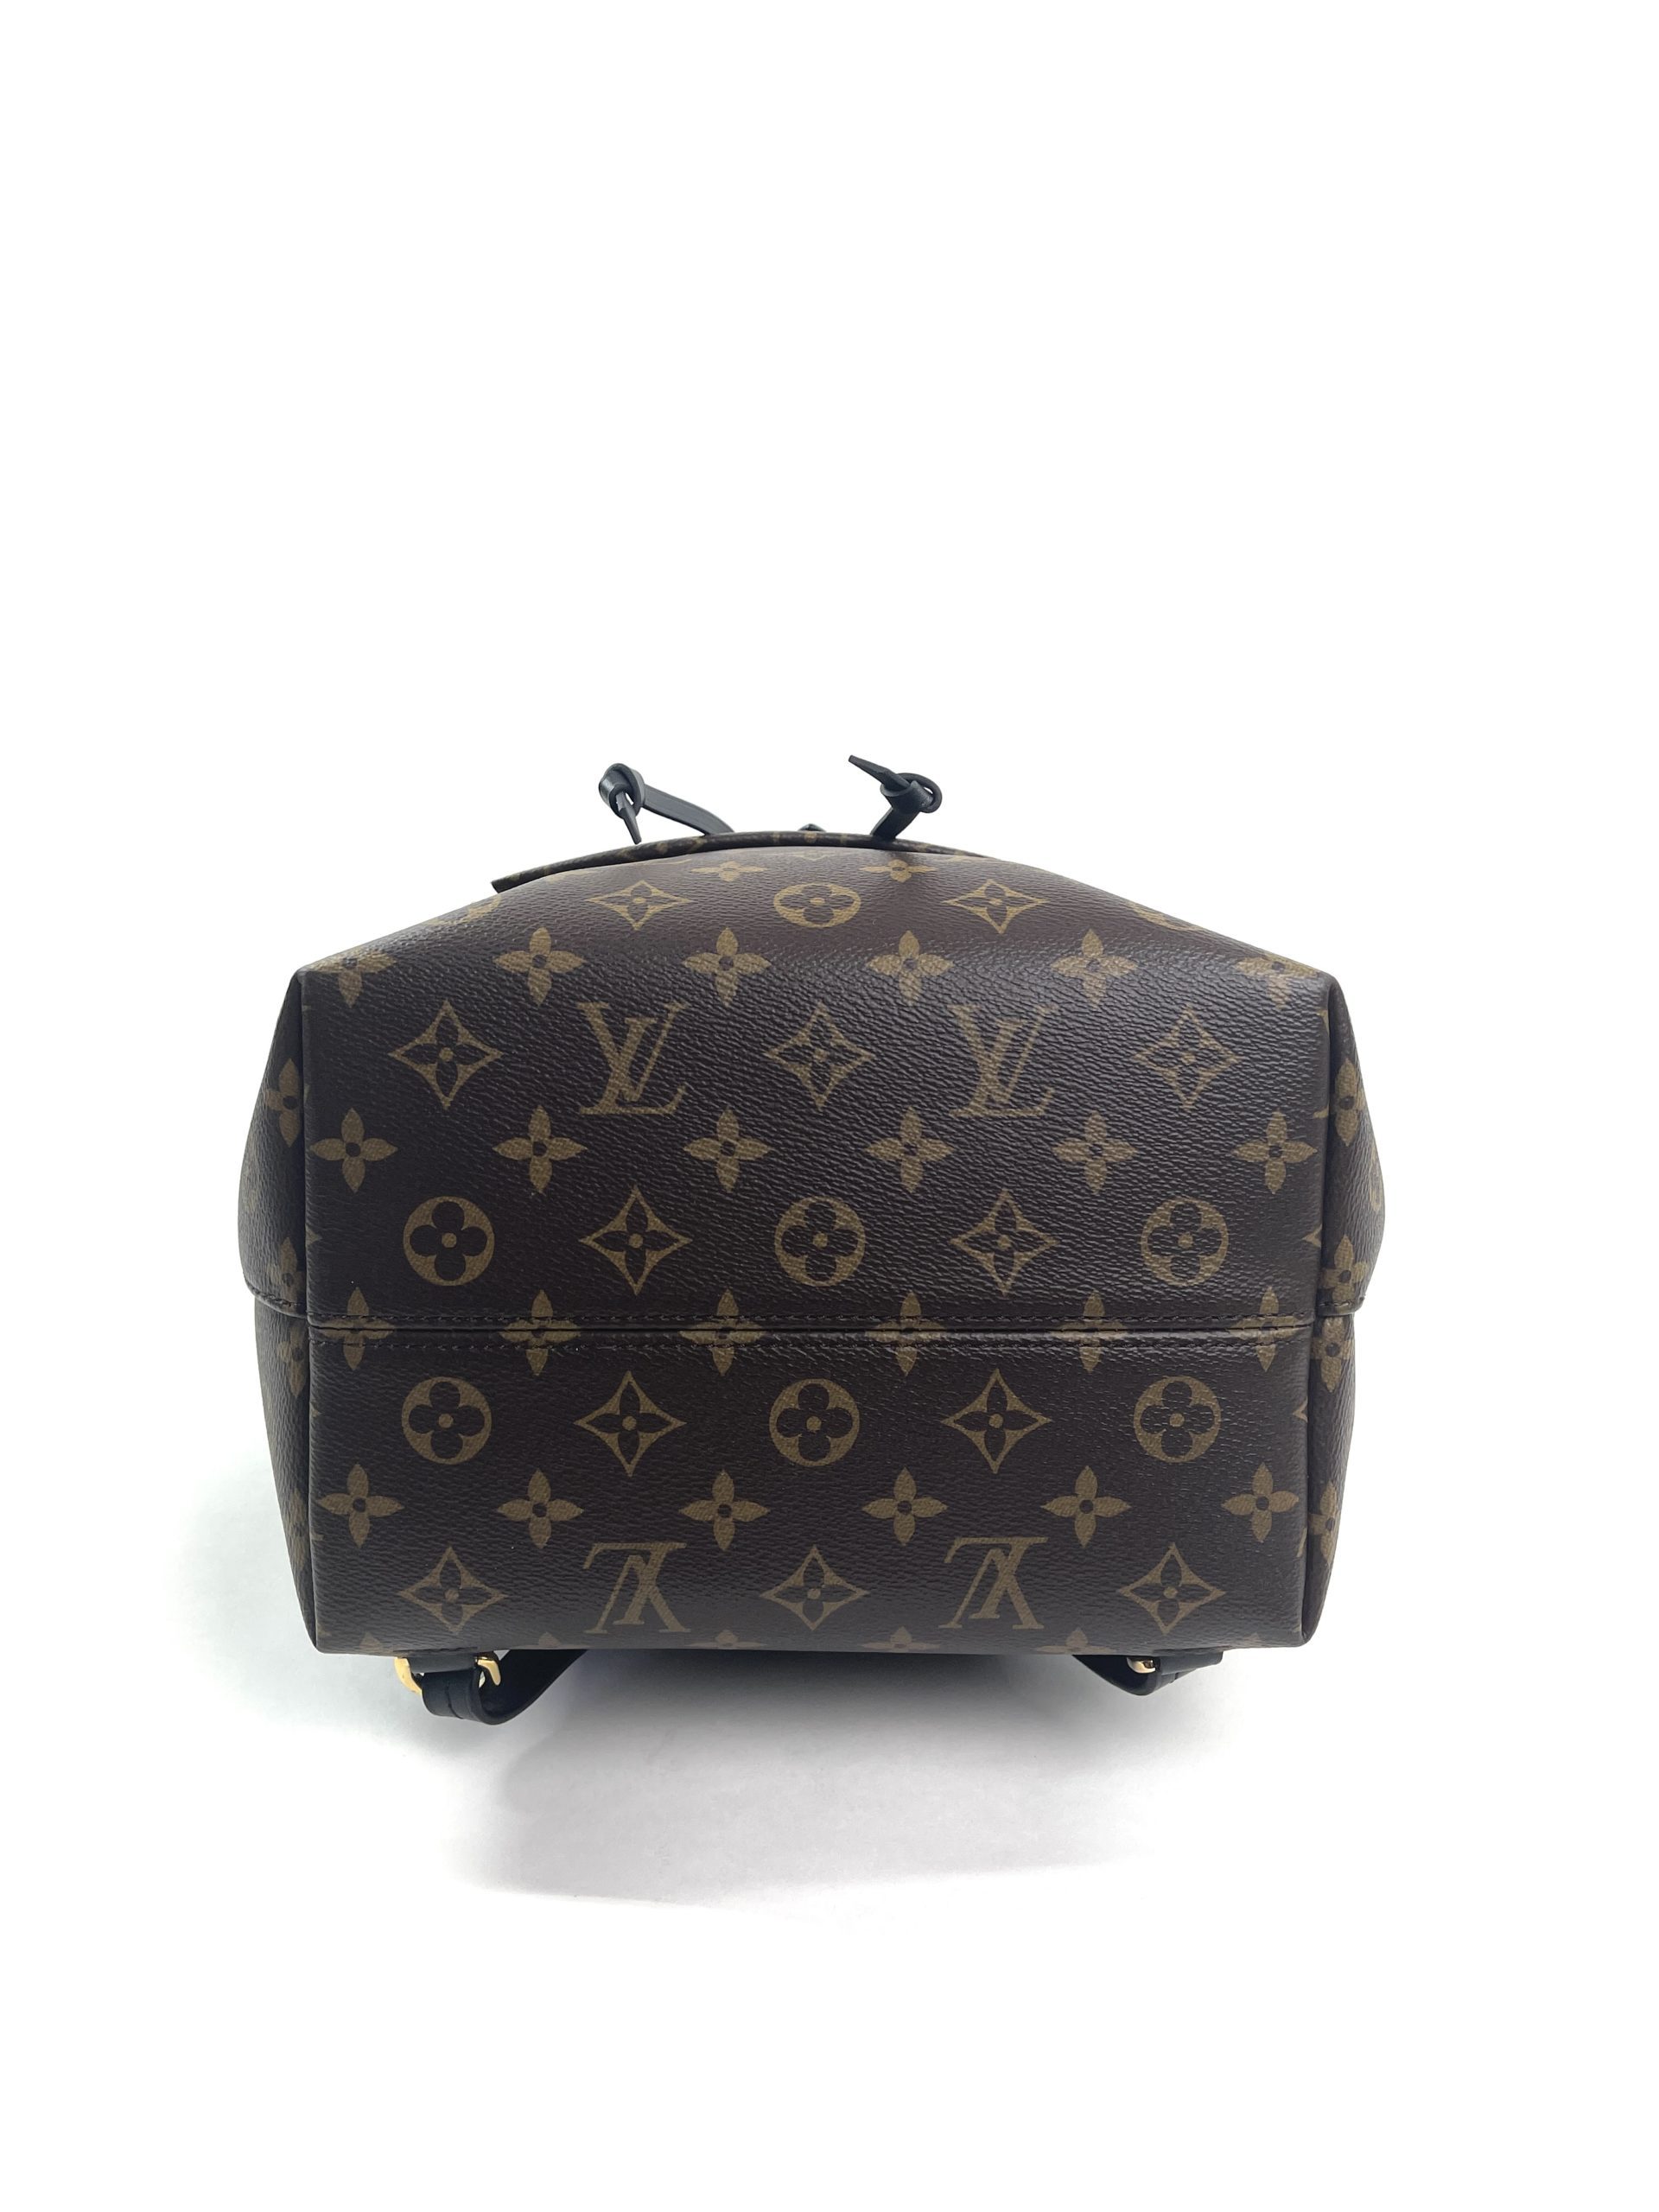 Louis Vuitton, Bags, Lv Monogram Montsouris Backpack Bb Authentic In  Great Condition Wdust Bag